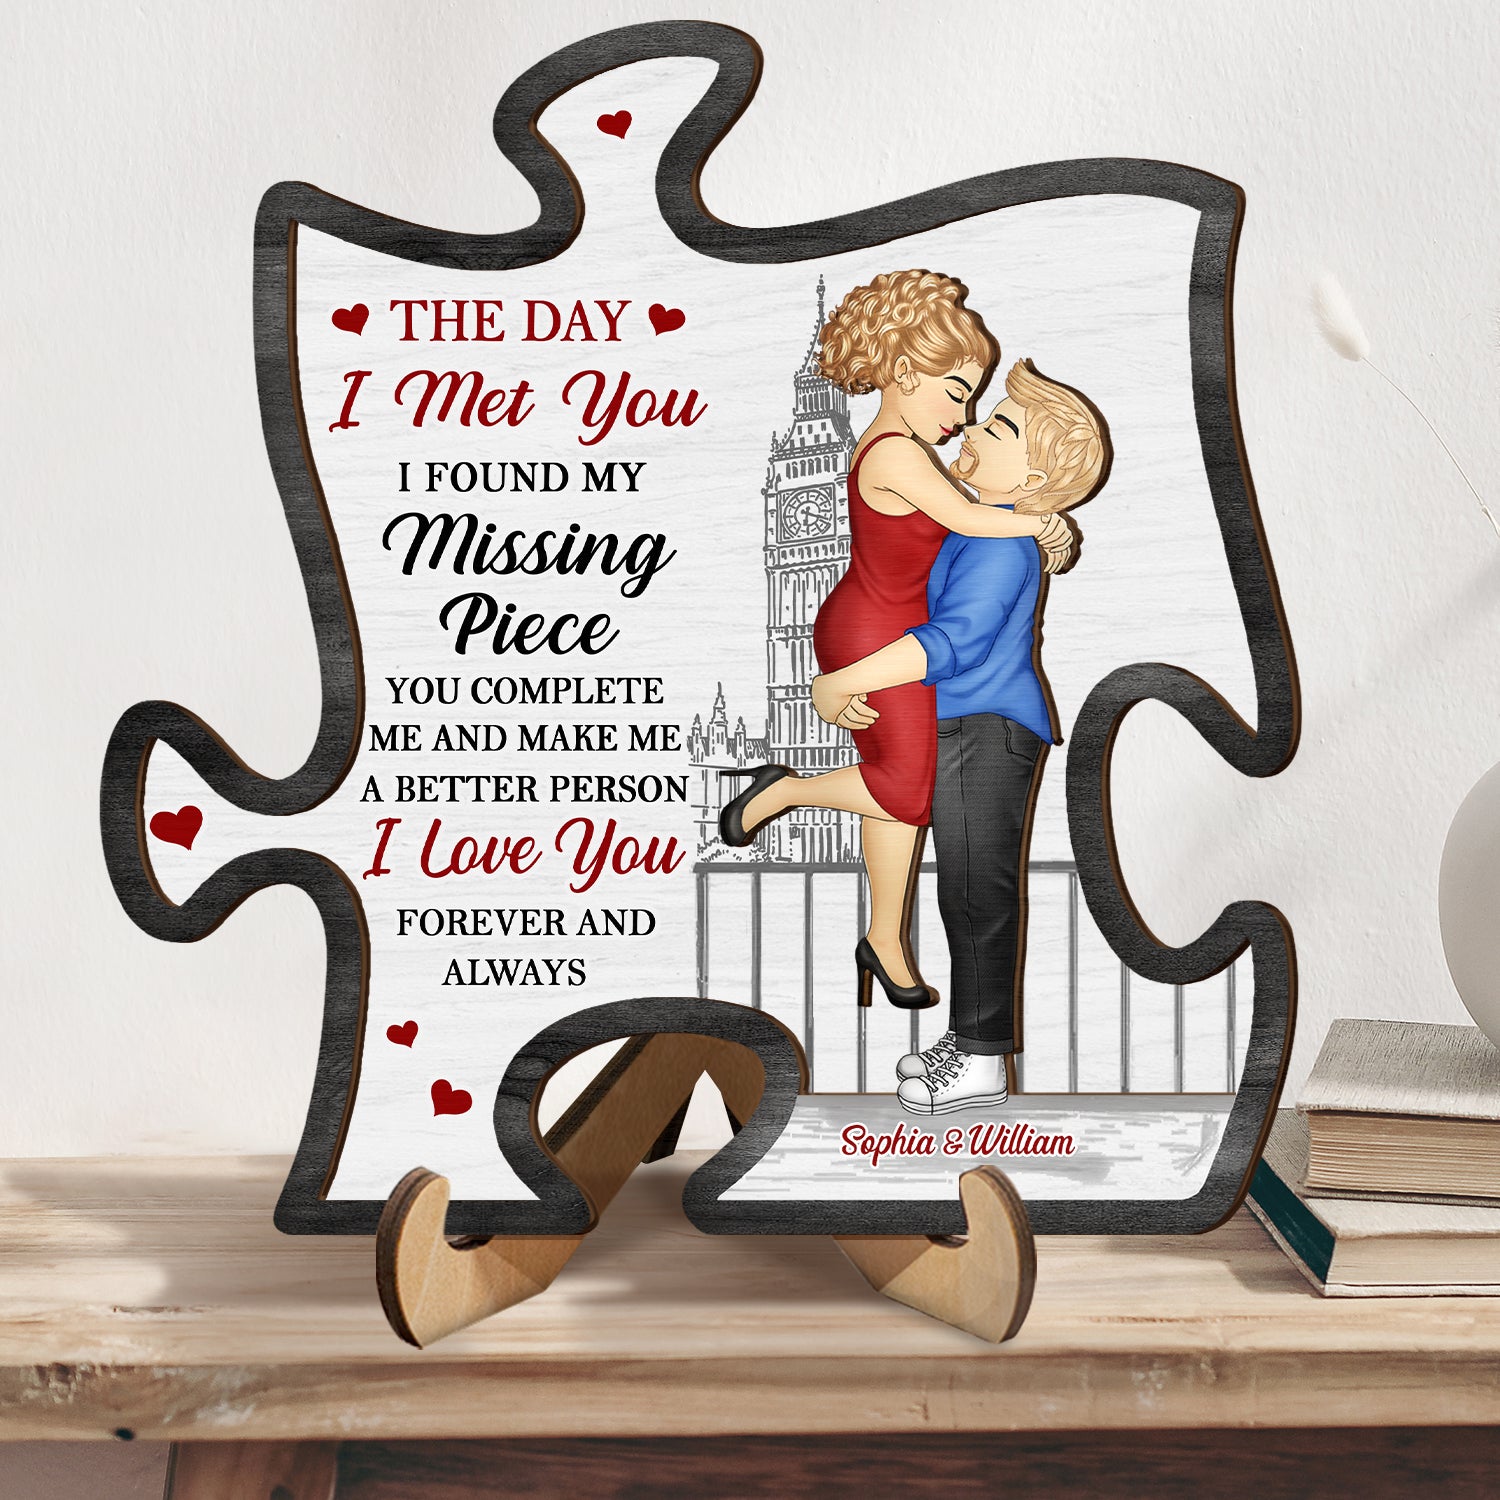 The Day I Met You I Found My Missing Piece - Anniversary Gift For Spouse, Lover, Couple - Personalized 2-Layered Wooden Plaque With Stand